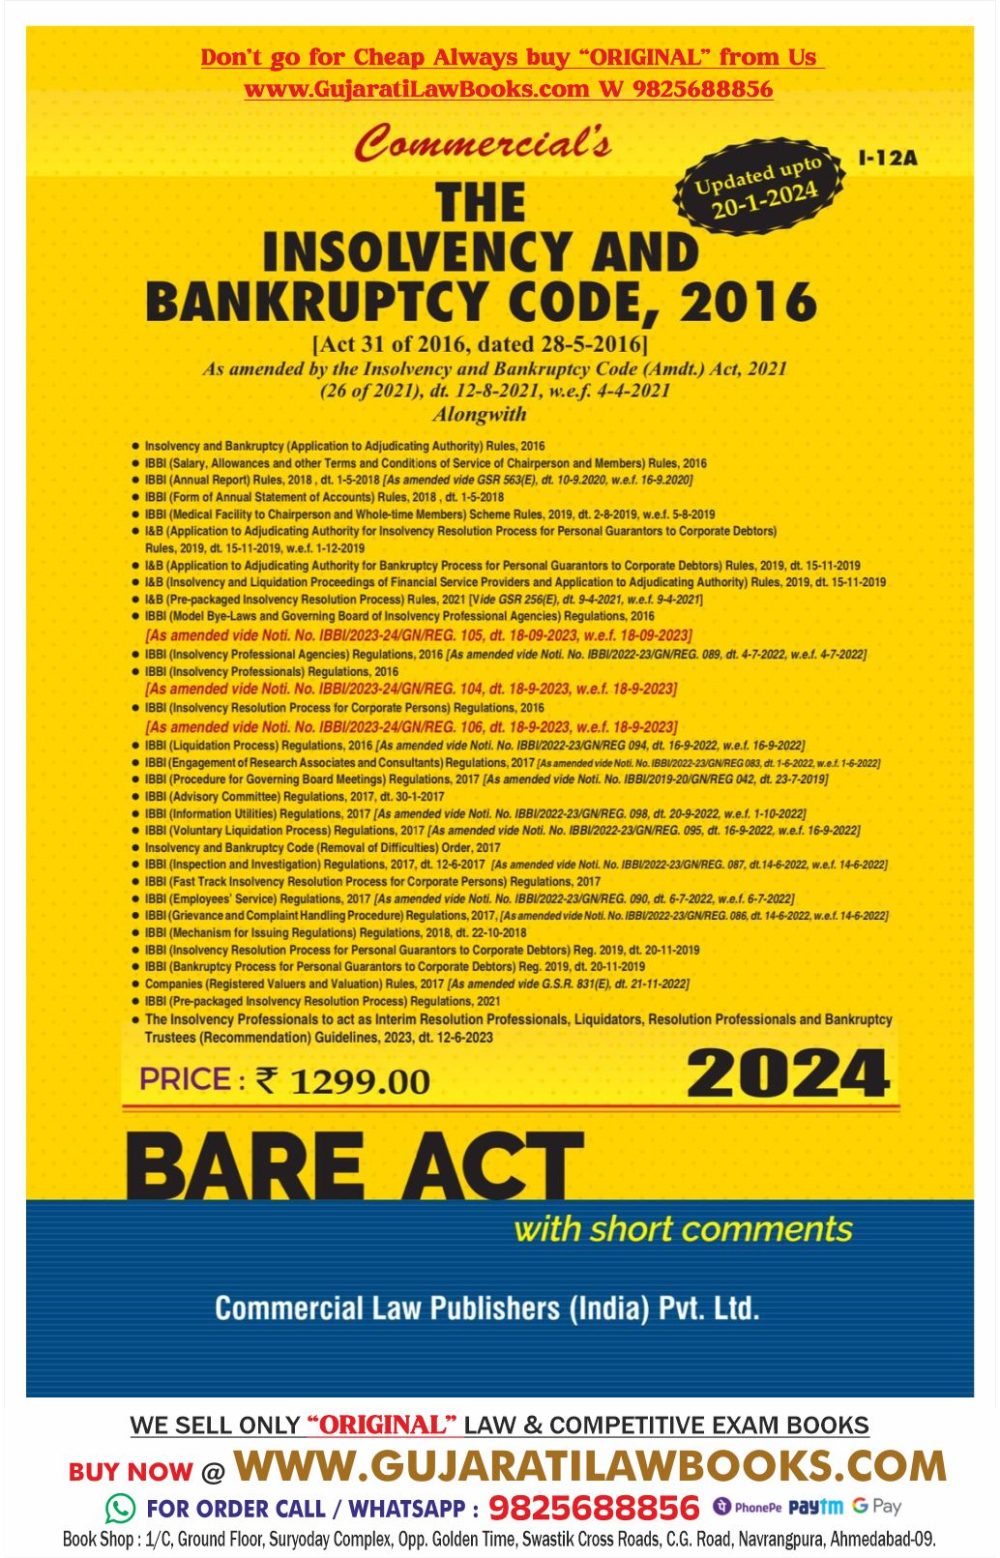 Commercial's The Insolvency and Bankruptcy Code, 2016 - BARE ACT - Updated 20-1-2024 Edition